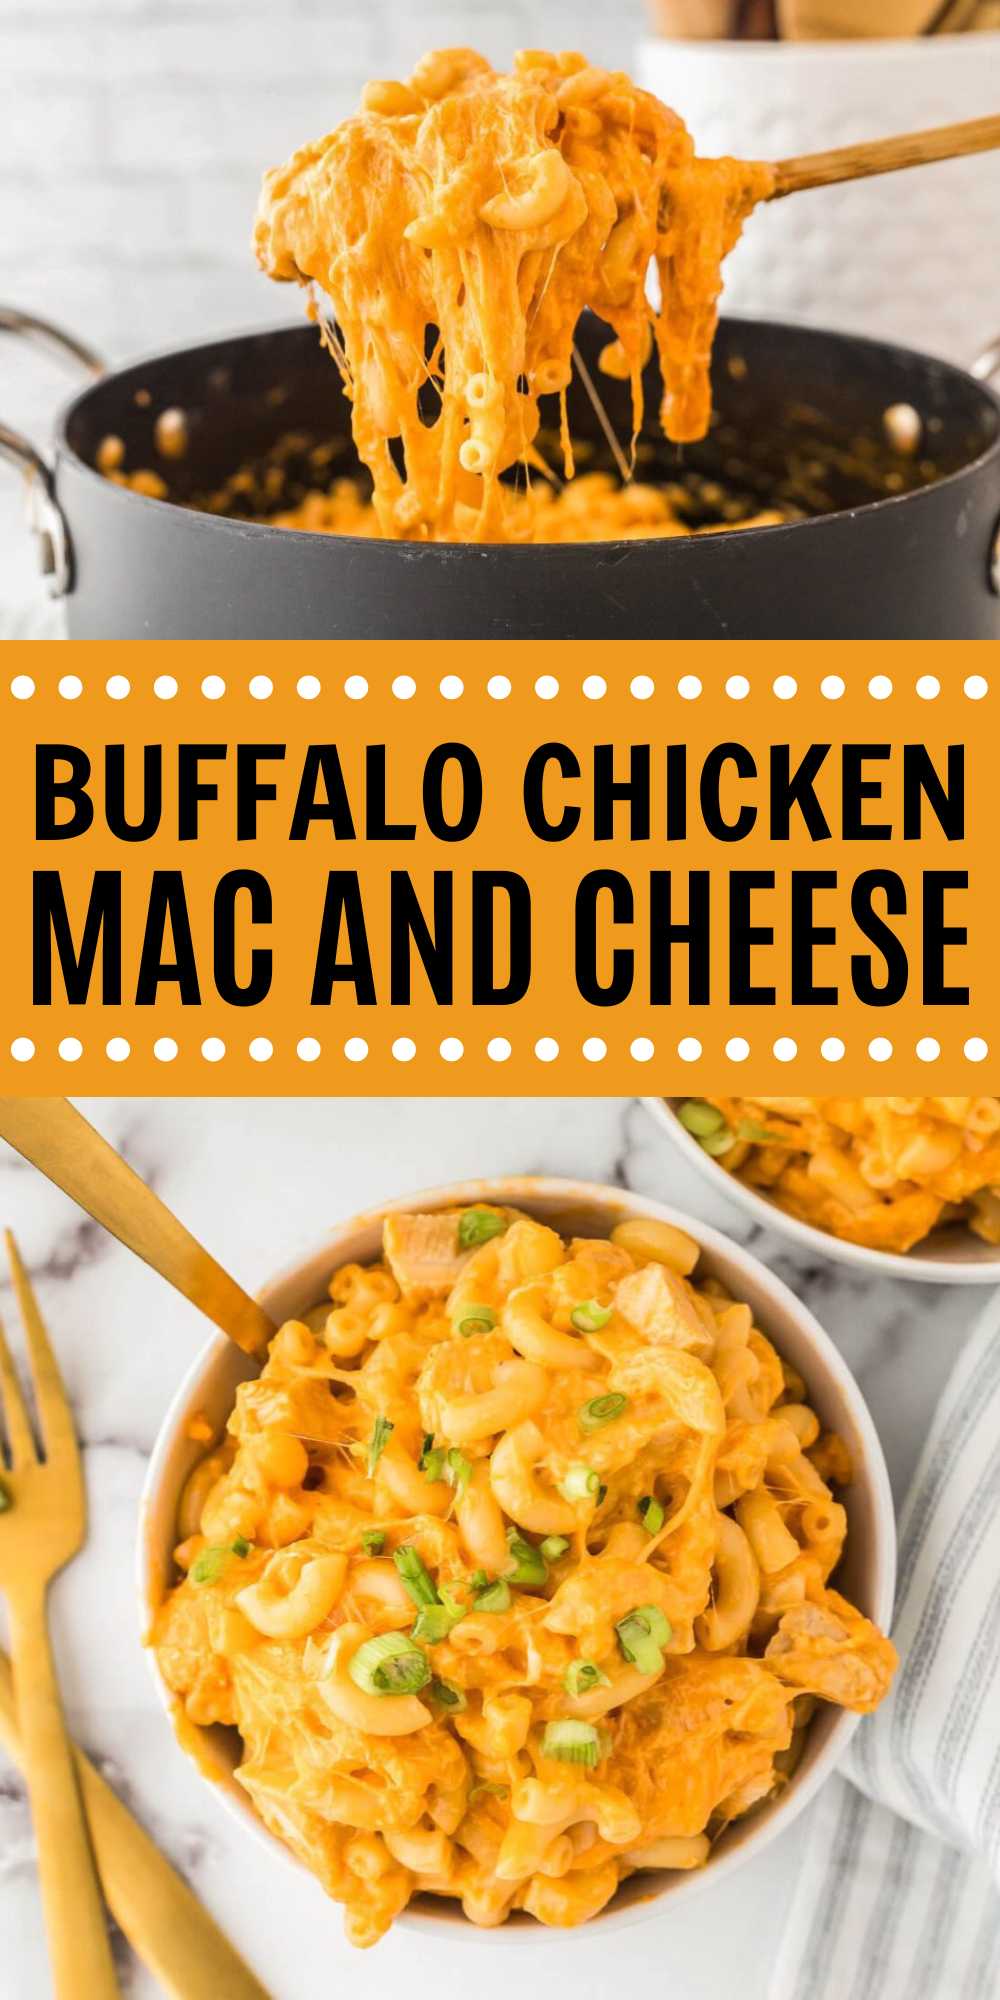 Buffalo Chicken Mac and Cheese is loaded with cheese, sauce, noodles and chicken. It is the perfect weeknight meal and is easy to make. Easy mac and cheese buffalo chicken recipe is loaded with flavor. The perfect meal to use your leftover chicken and your cooked noodles in. All the ingredients are combined and cooked together on the stovetop. #eatingonadime #buffalochickenmacandcheese #buffalochicken #macandcheese